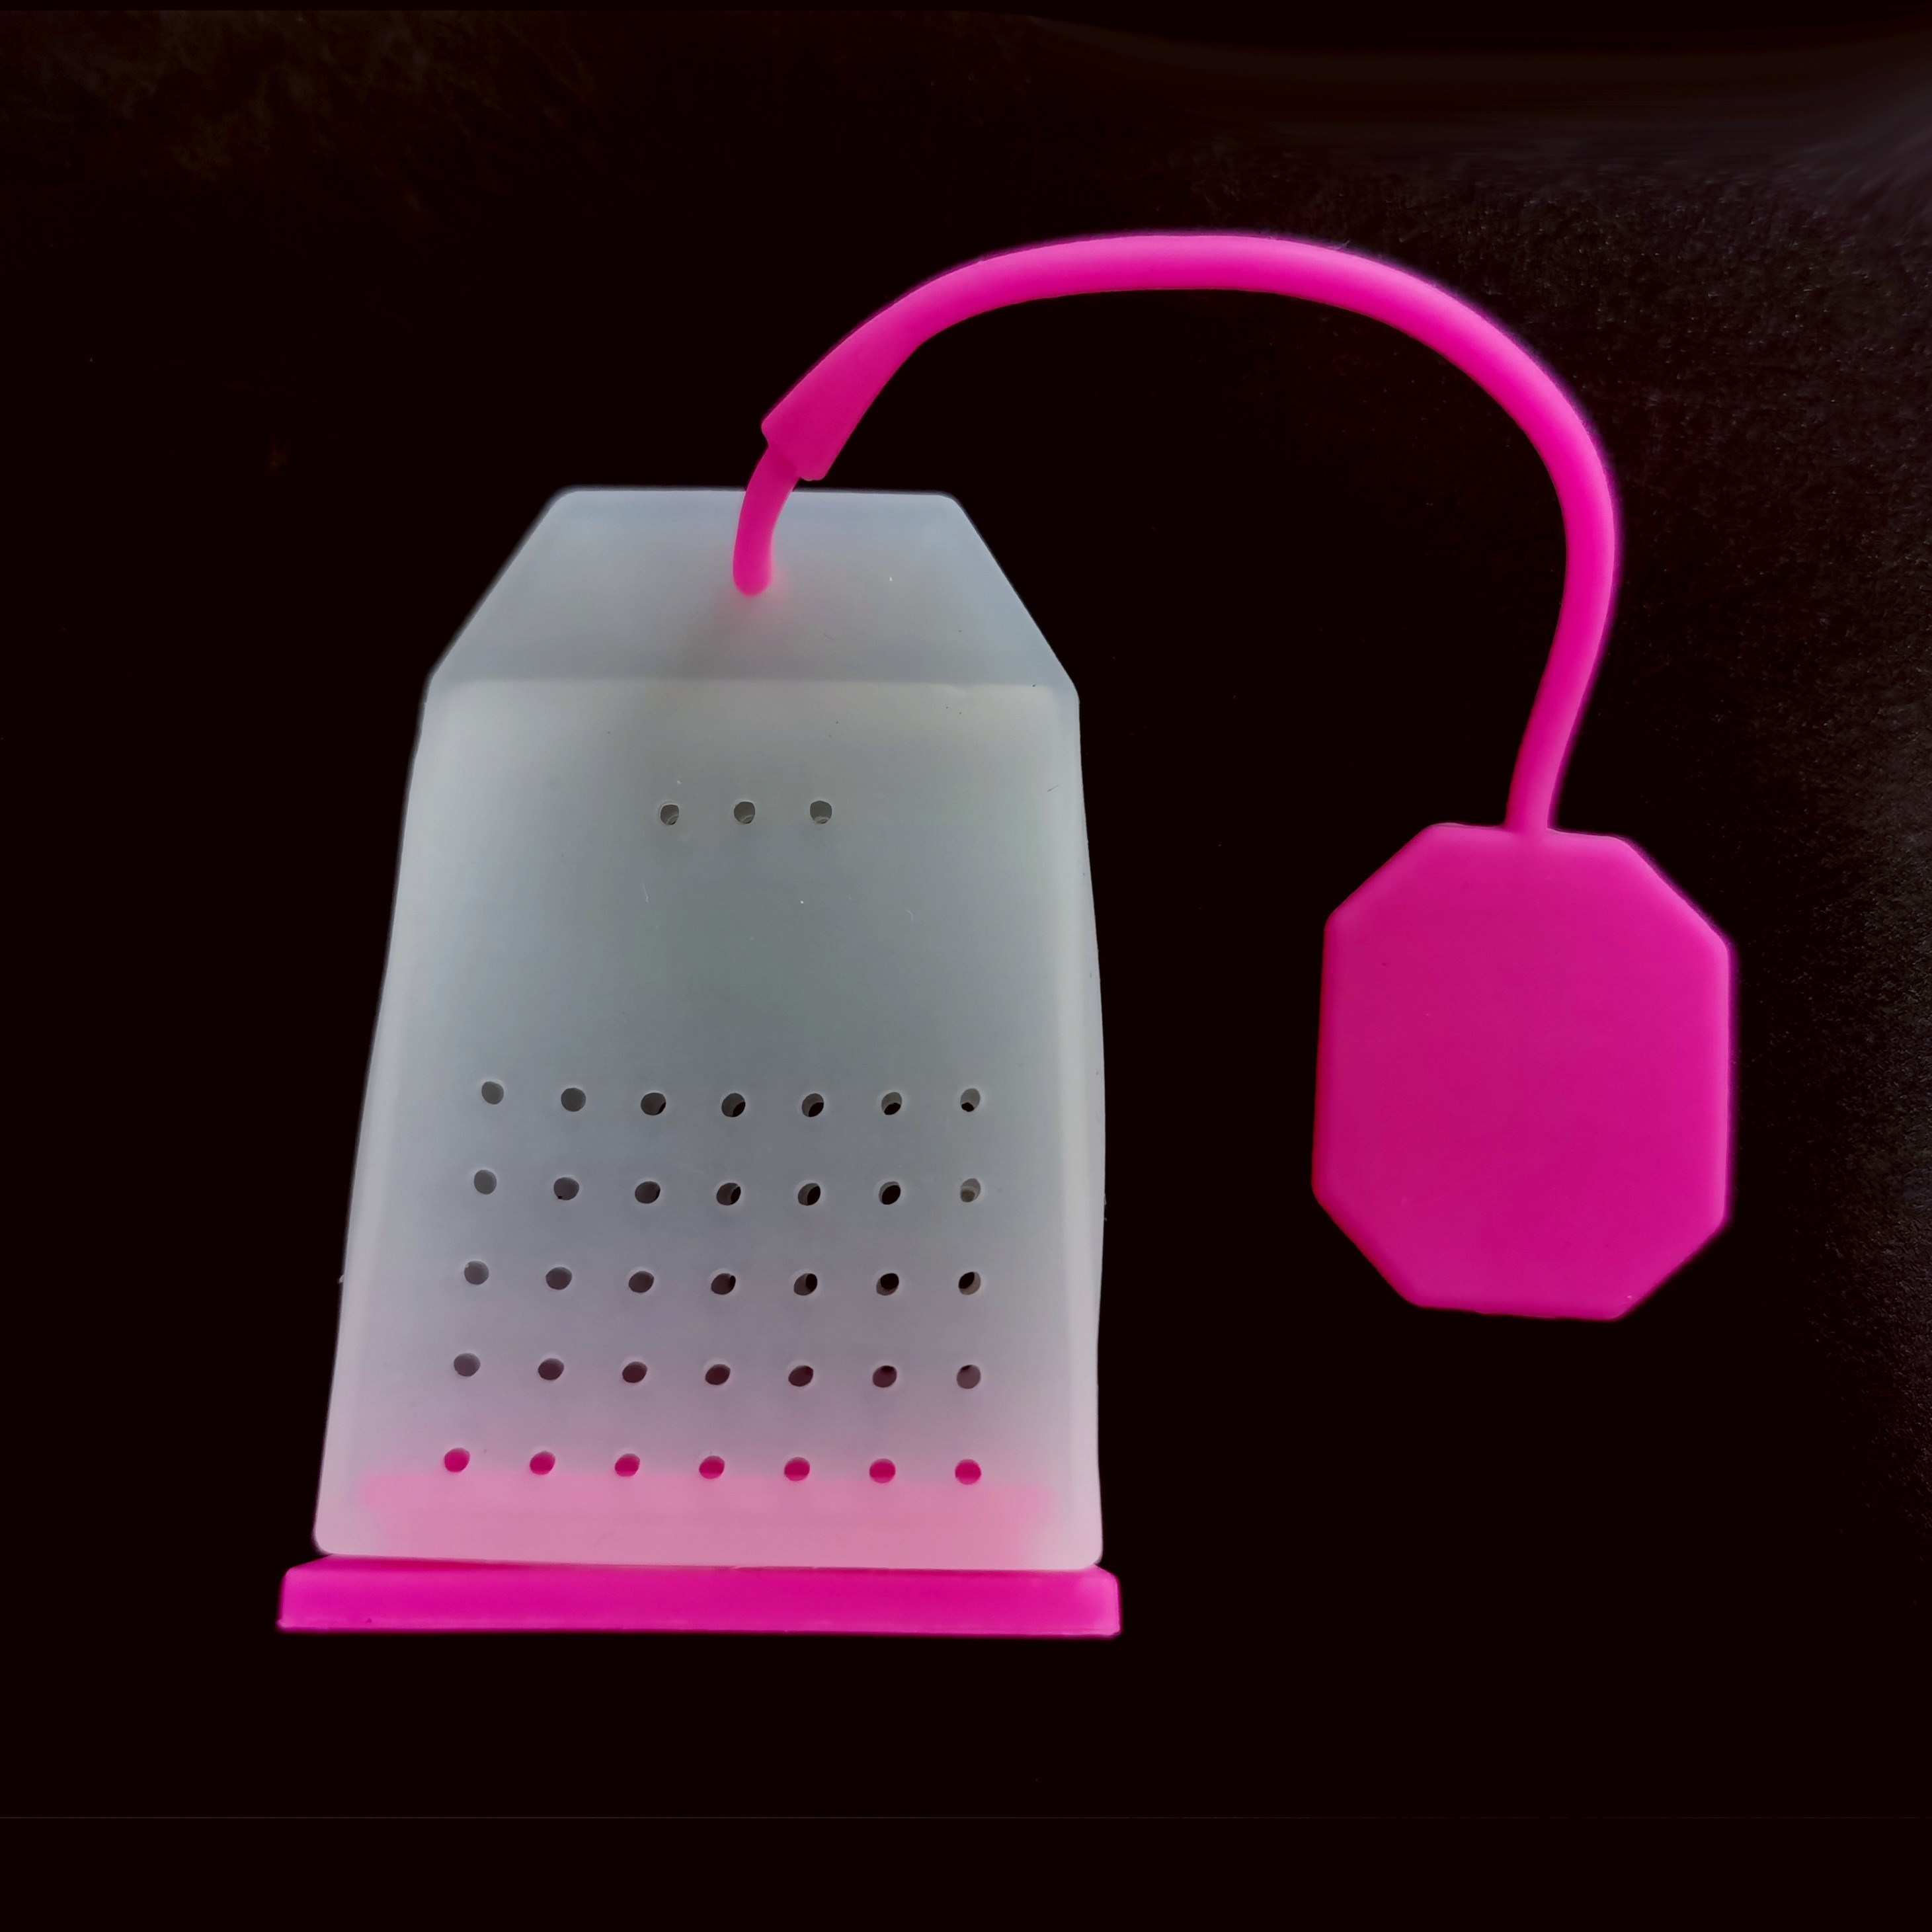 Brew Perfect Tea Every Time With This Silicone Tea Bag Filter! - Temu